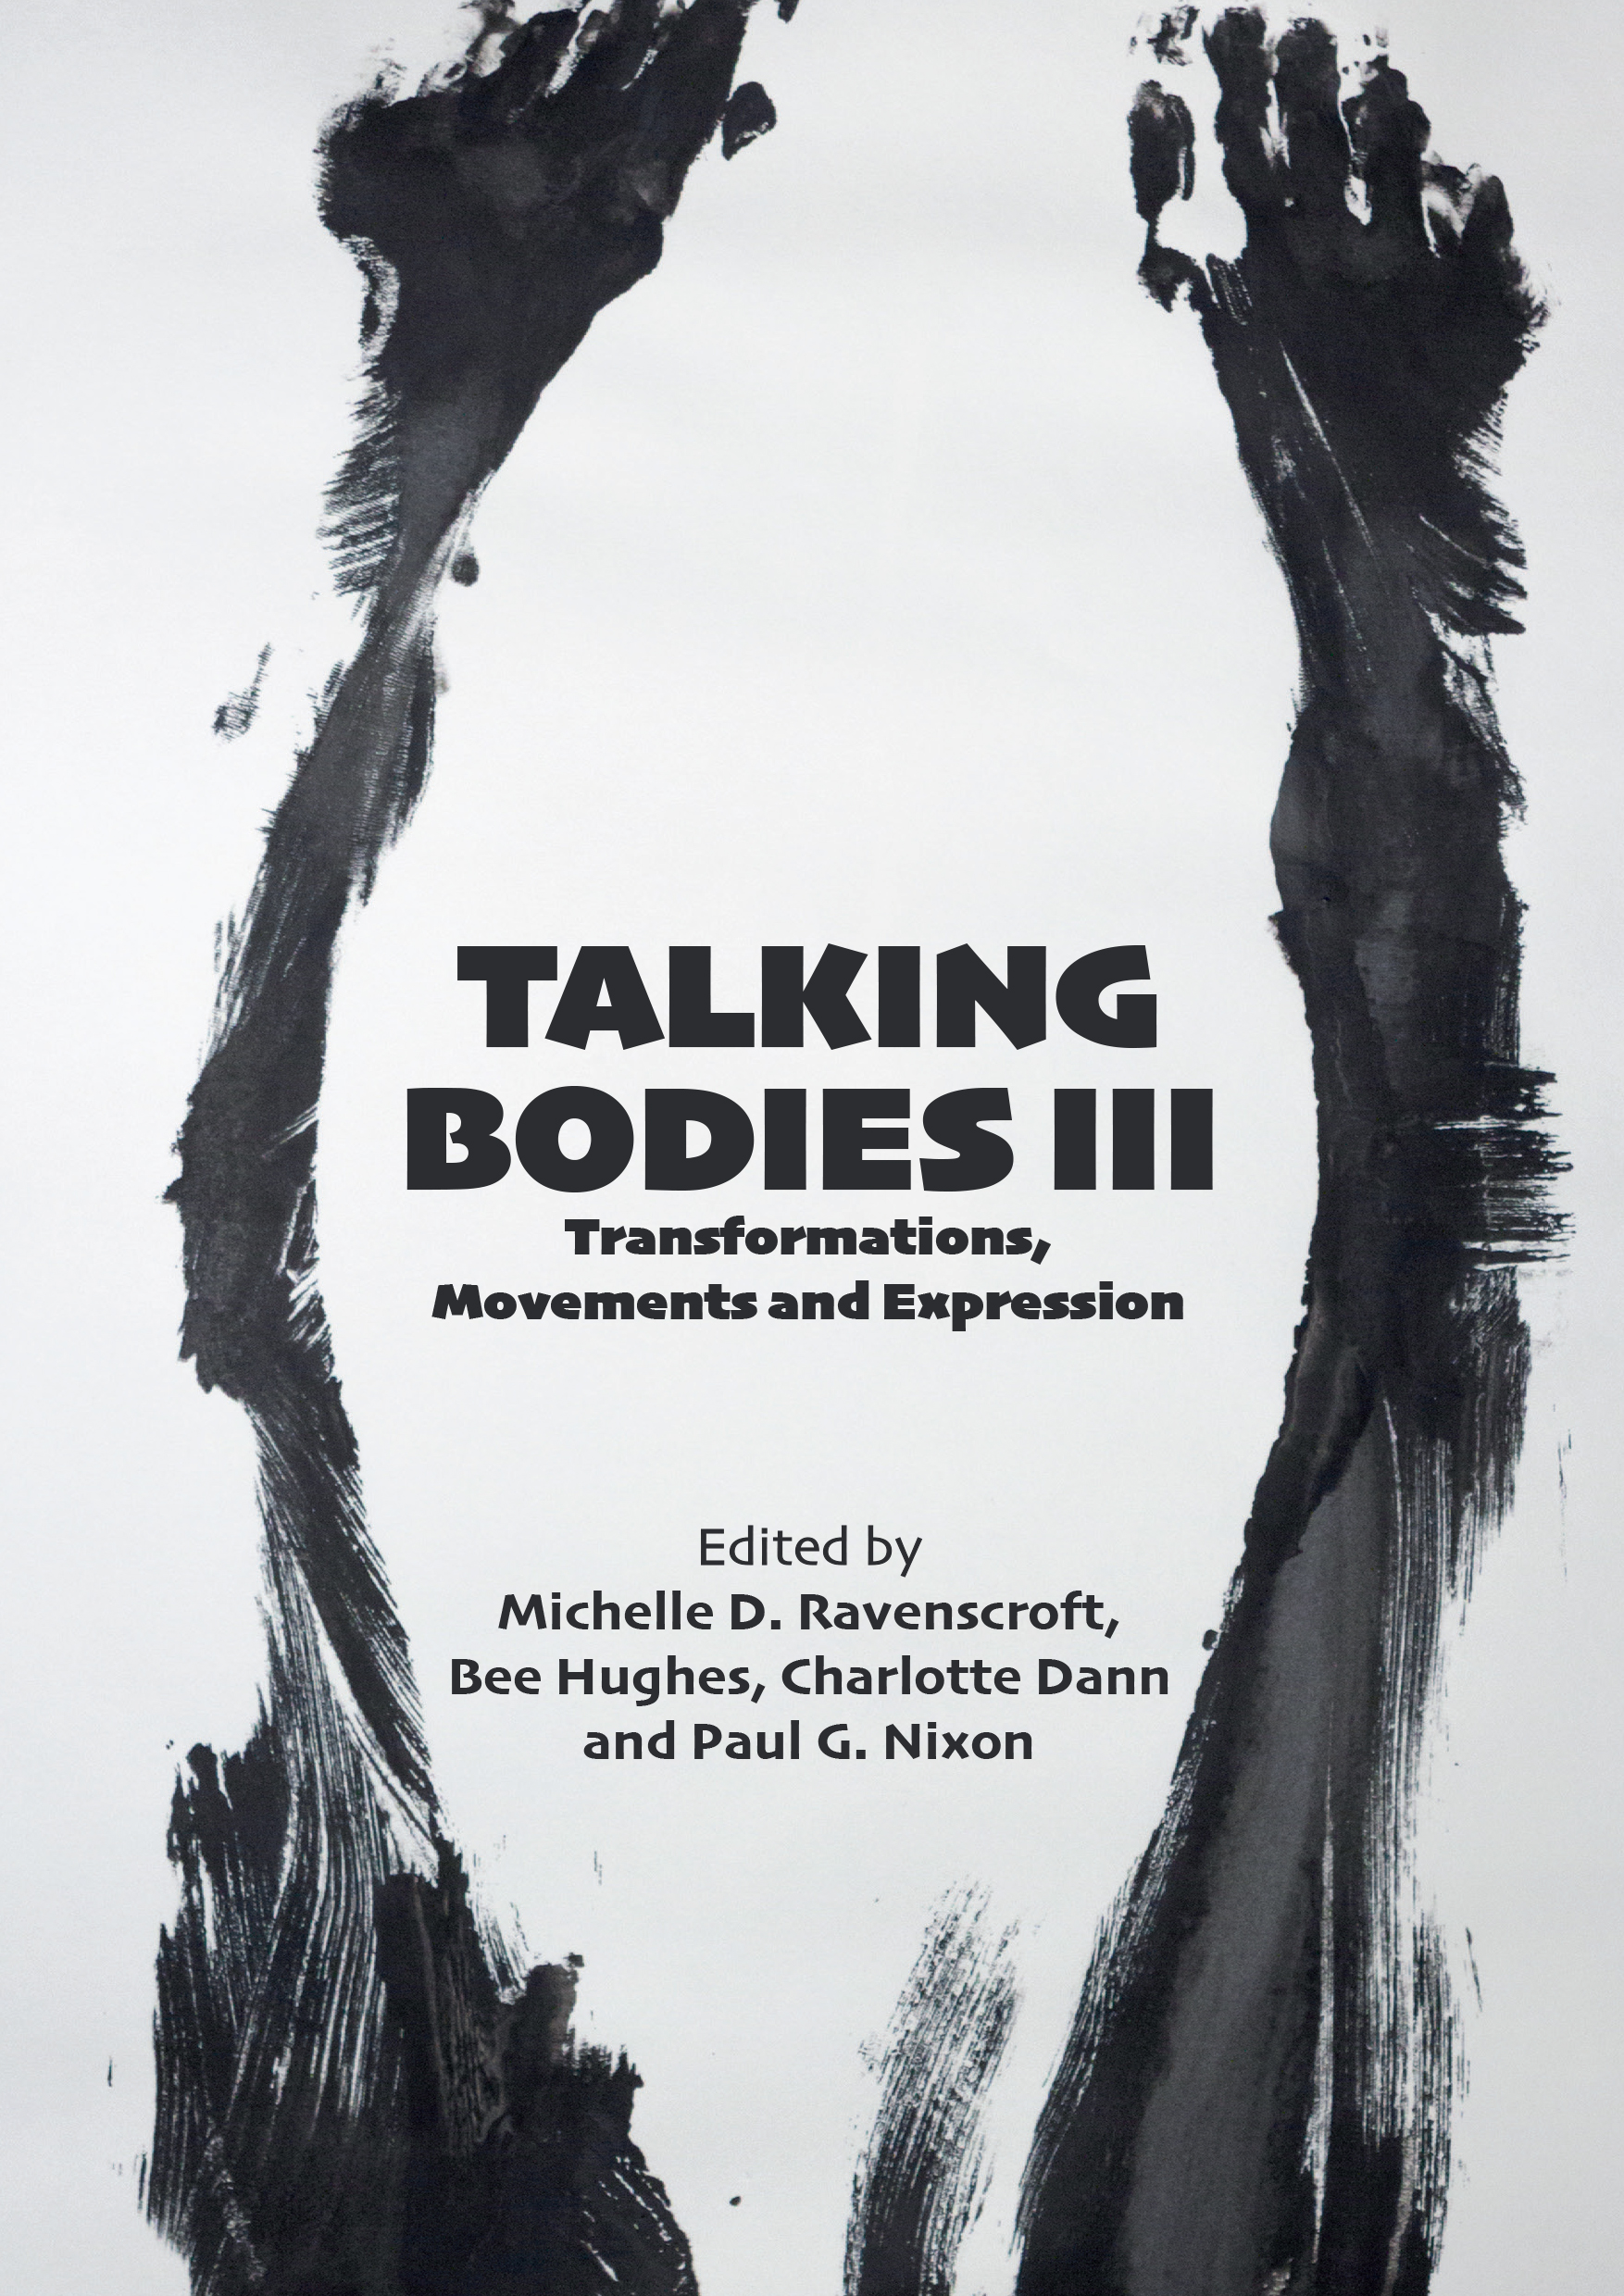 Talking Bodies III: Transformations, Movements and Expression